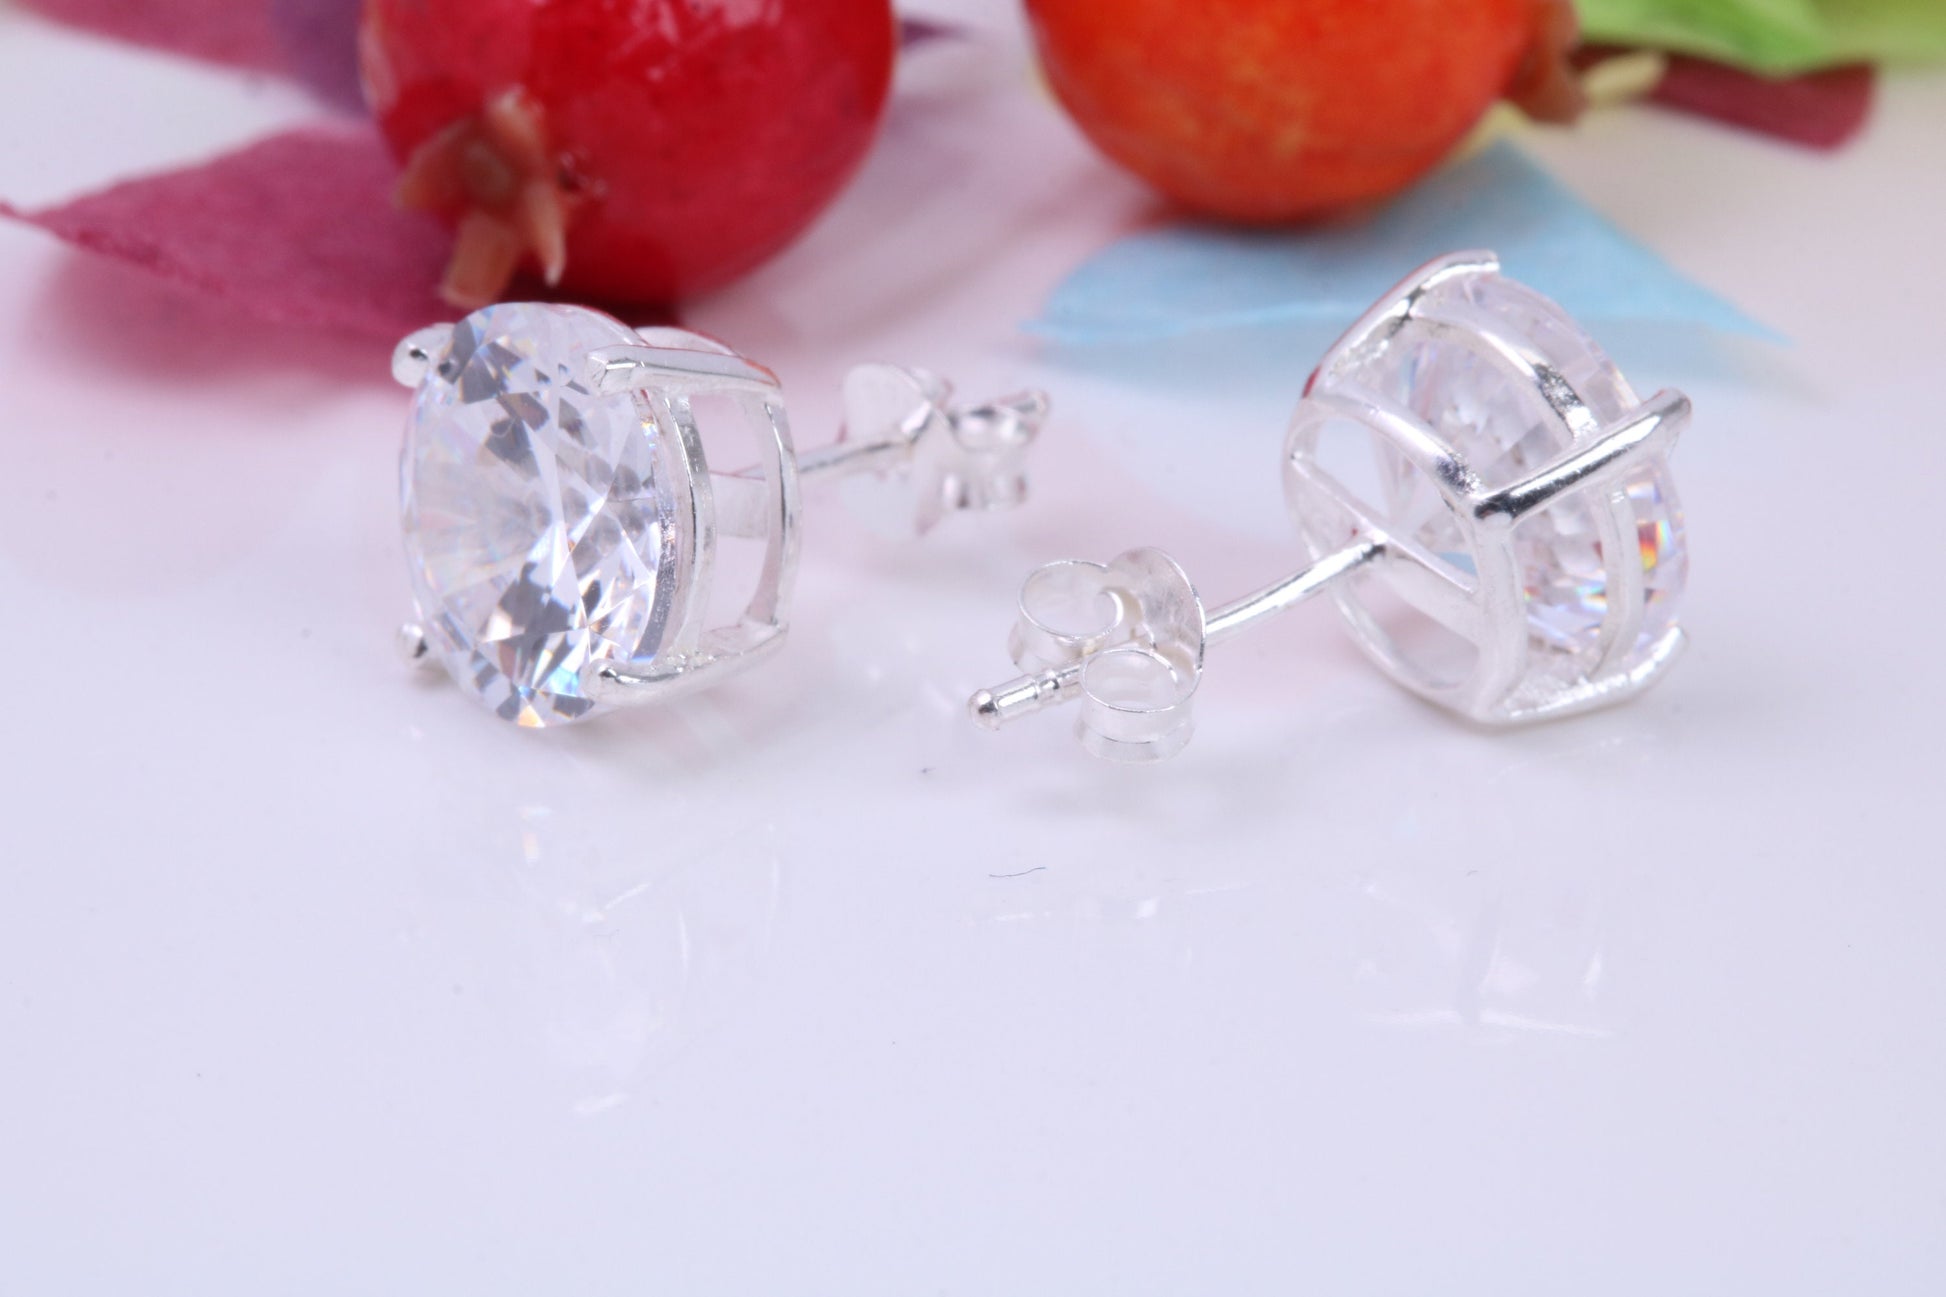 10 mm Round Cubic Zirconia set Stud Earrings, Made from Solid Cast Sterling Silver, Ideal for Gents